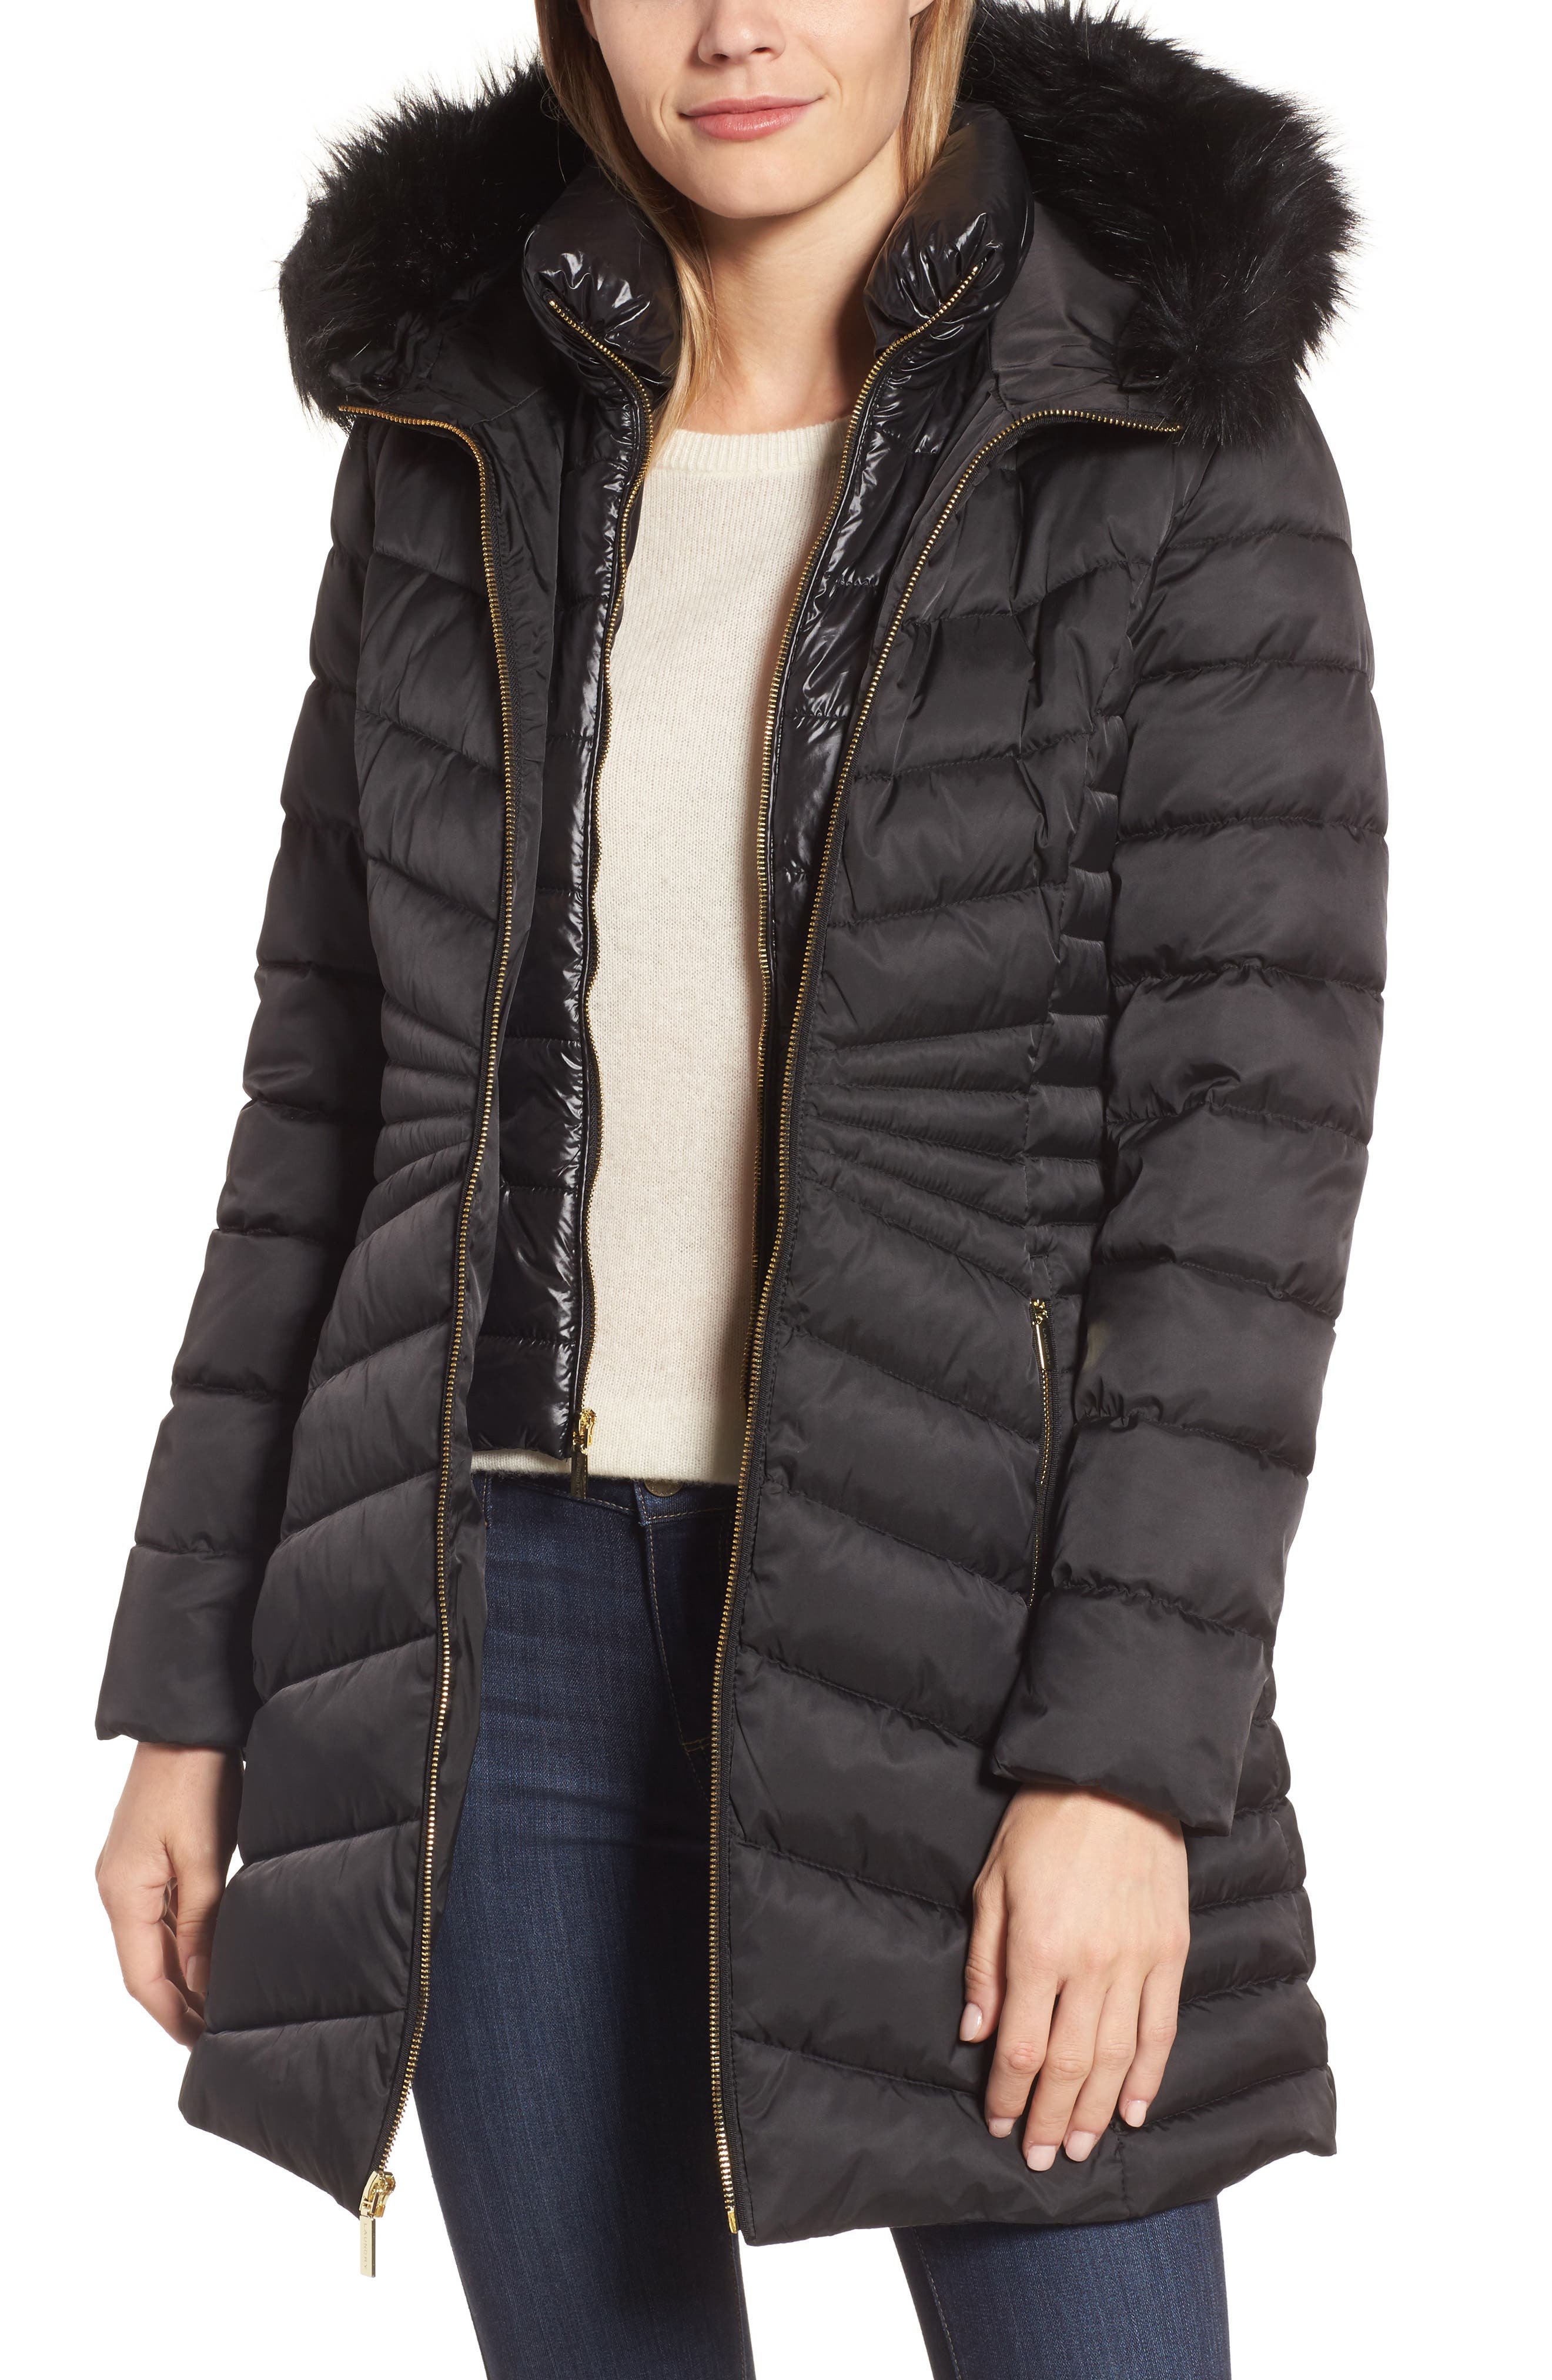 Laundry By Shelli Segal | Faux Fur Trim Hooded Puffer Coat | Nordstrom Rack